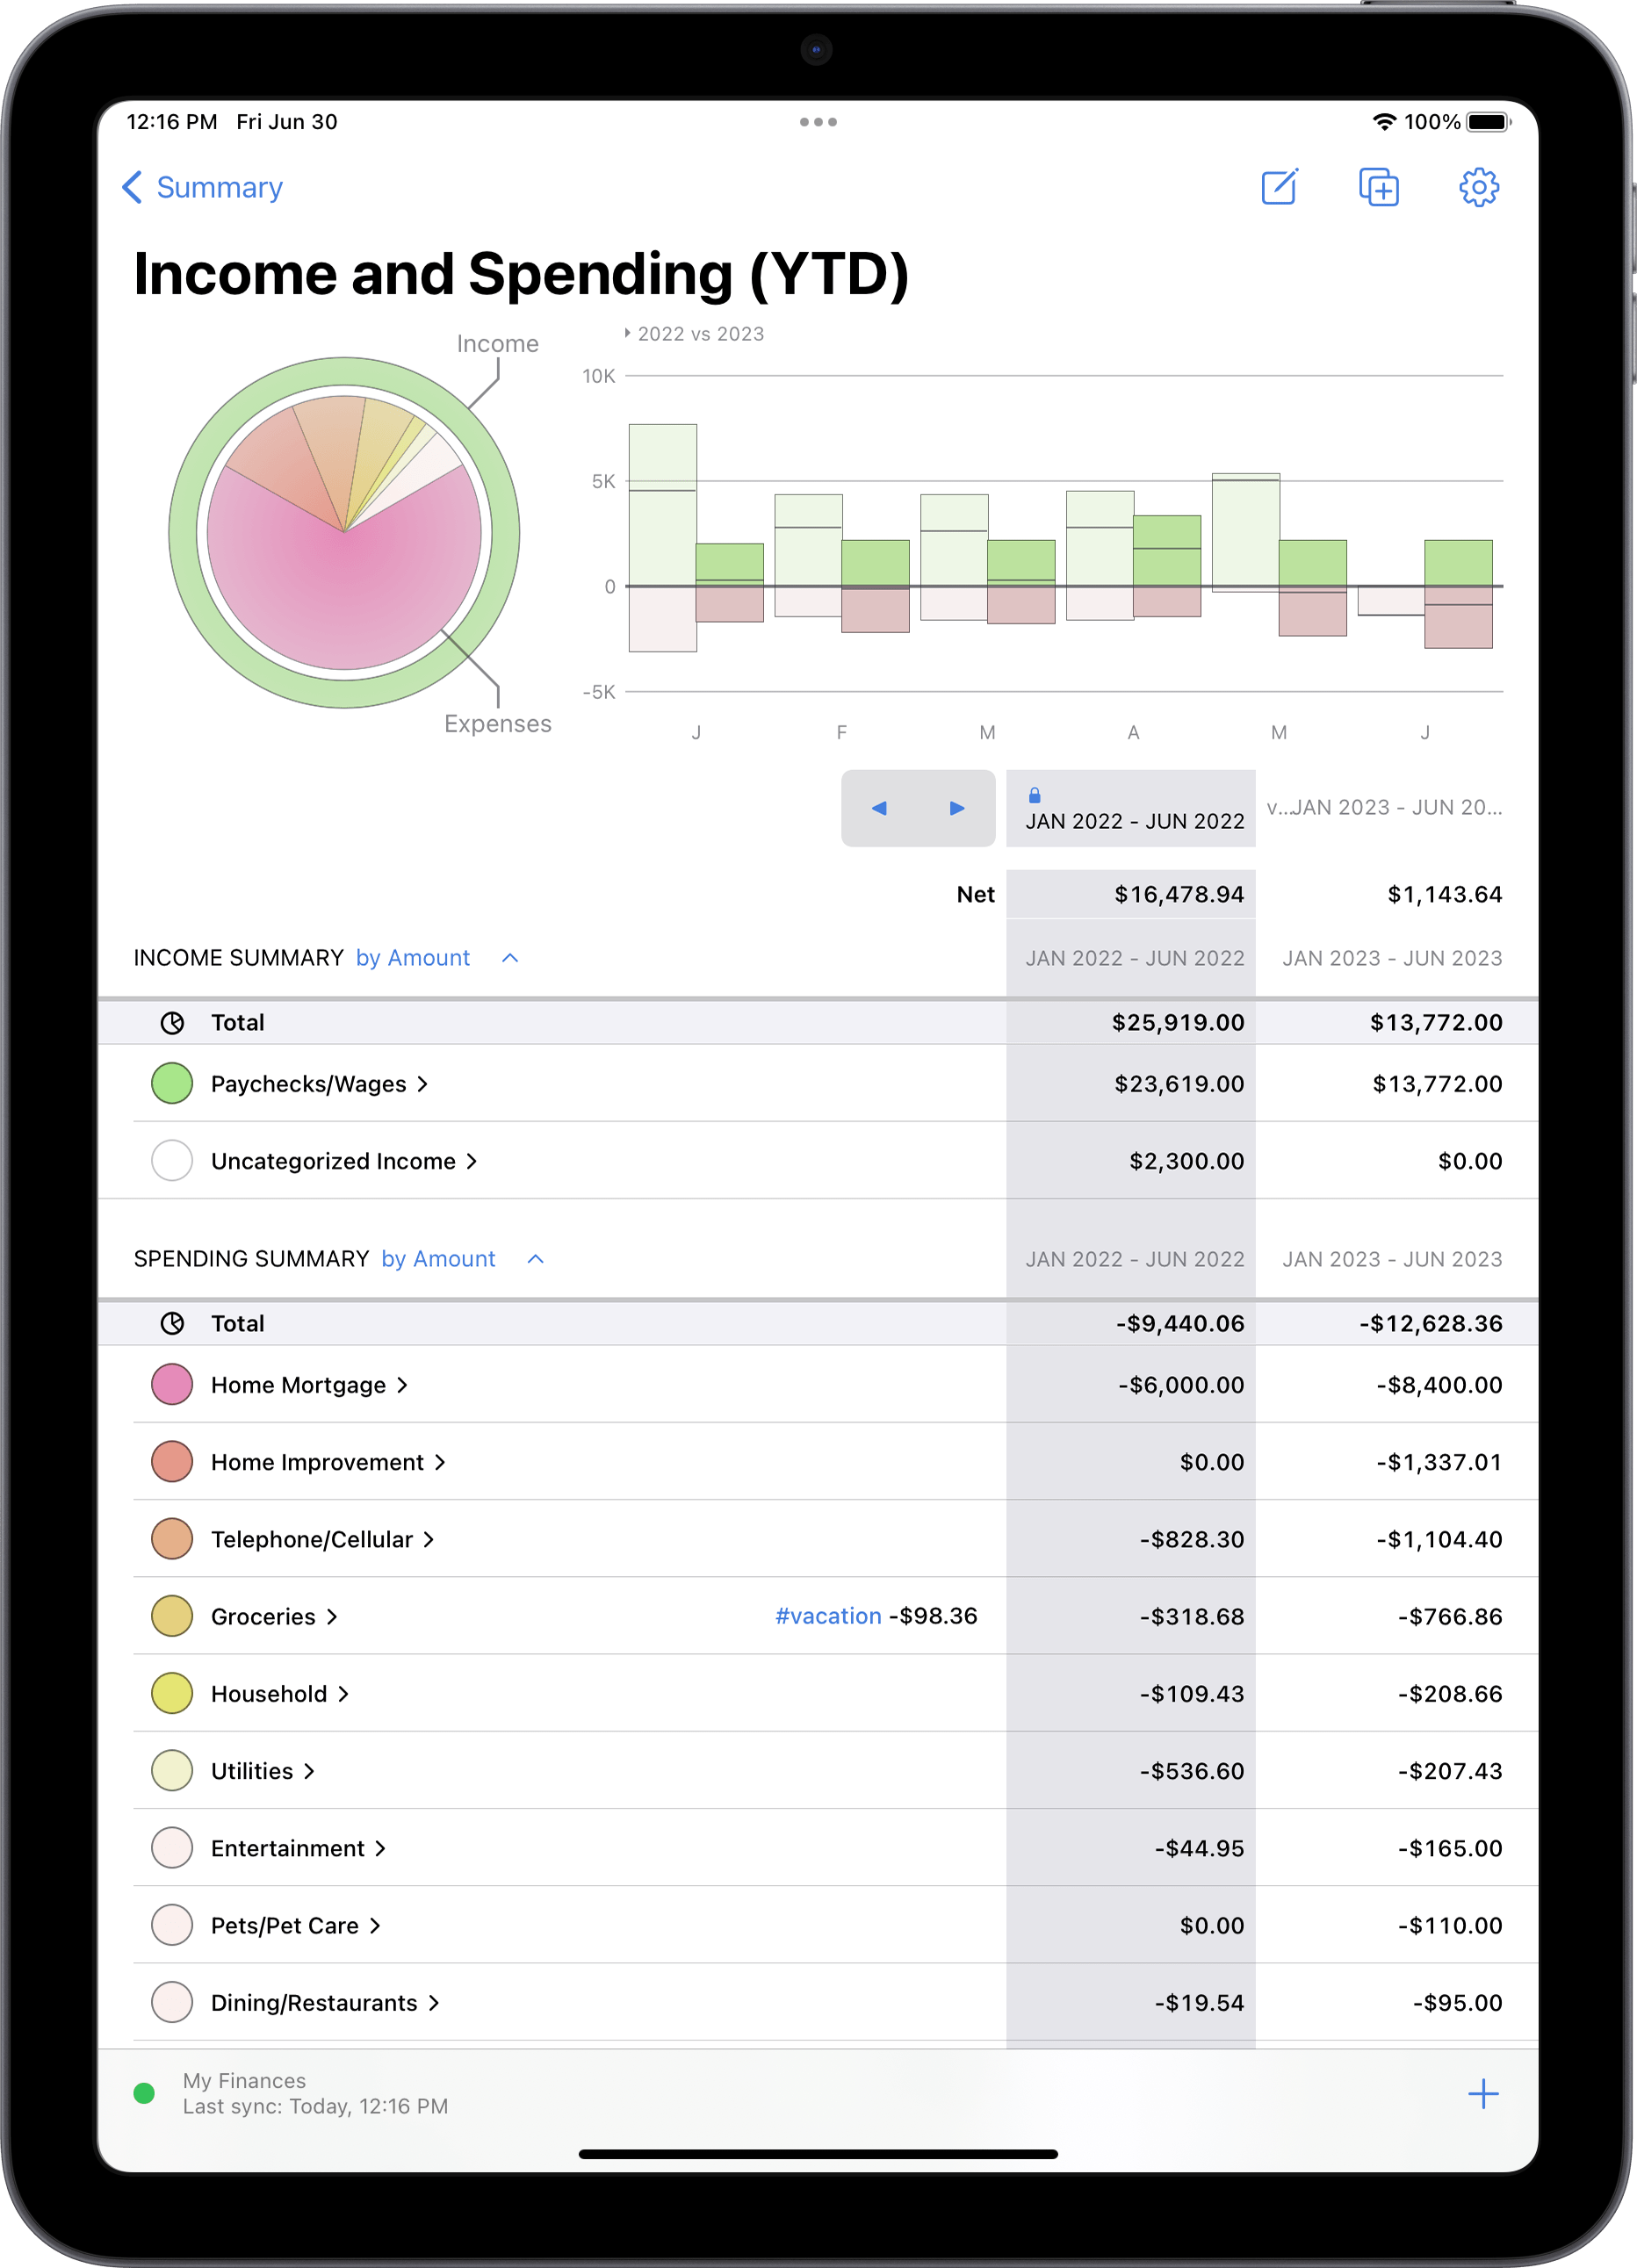 Income and expense report in portrait mode on iPad